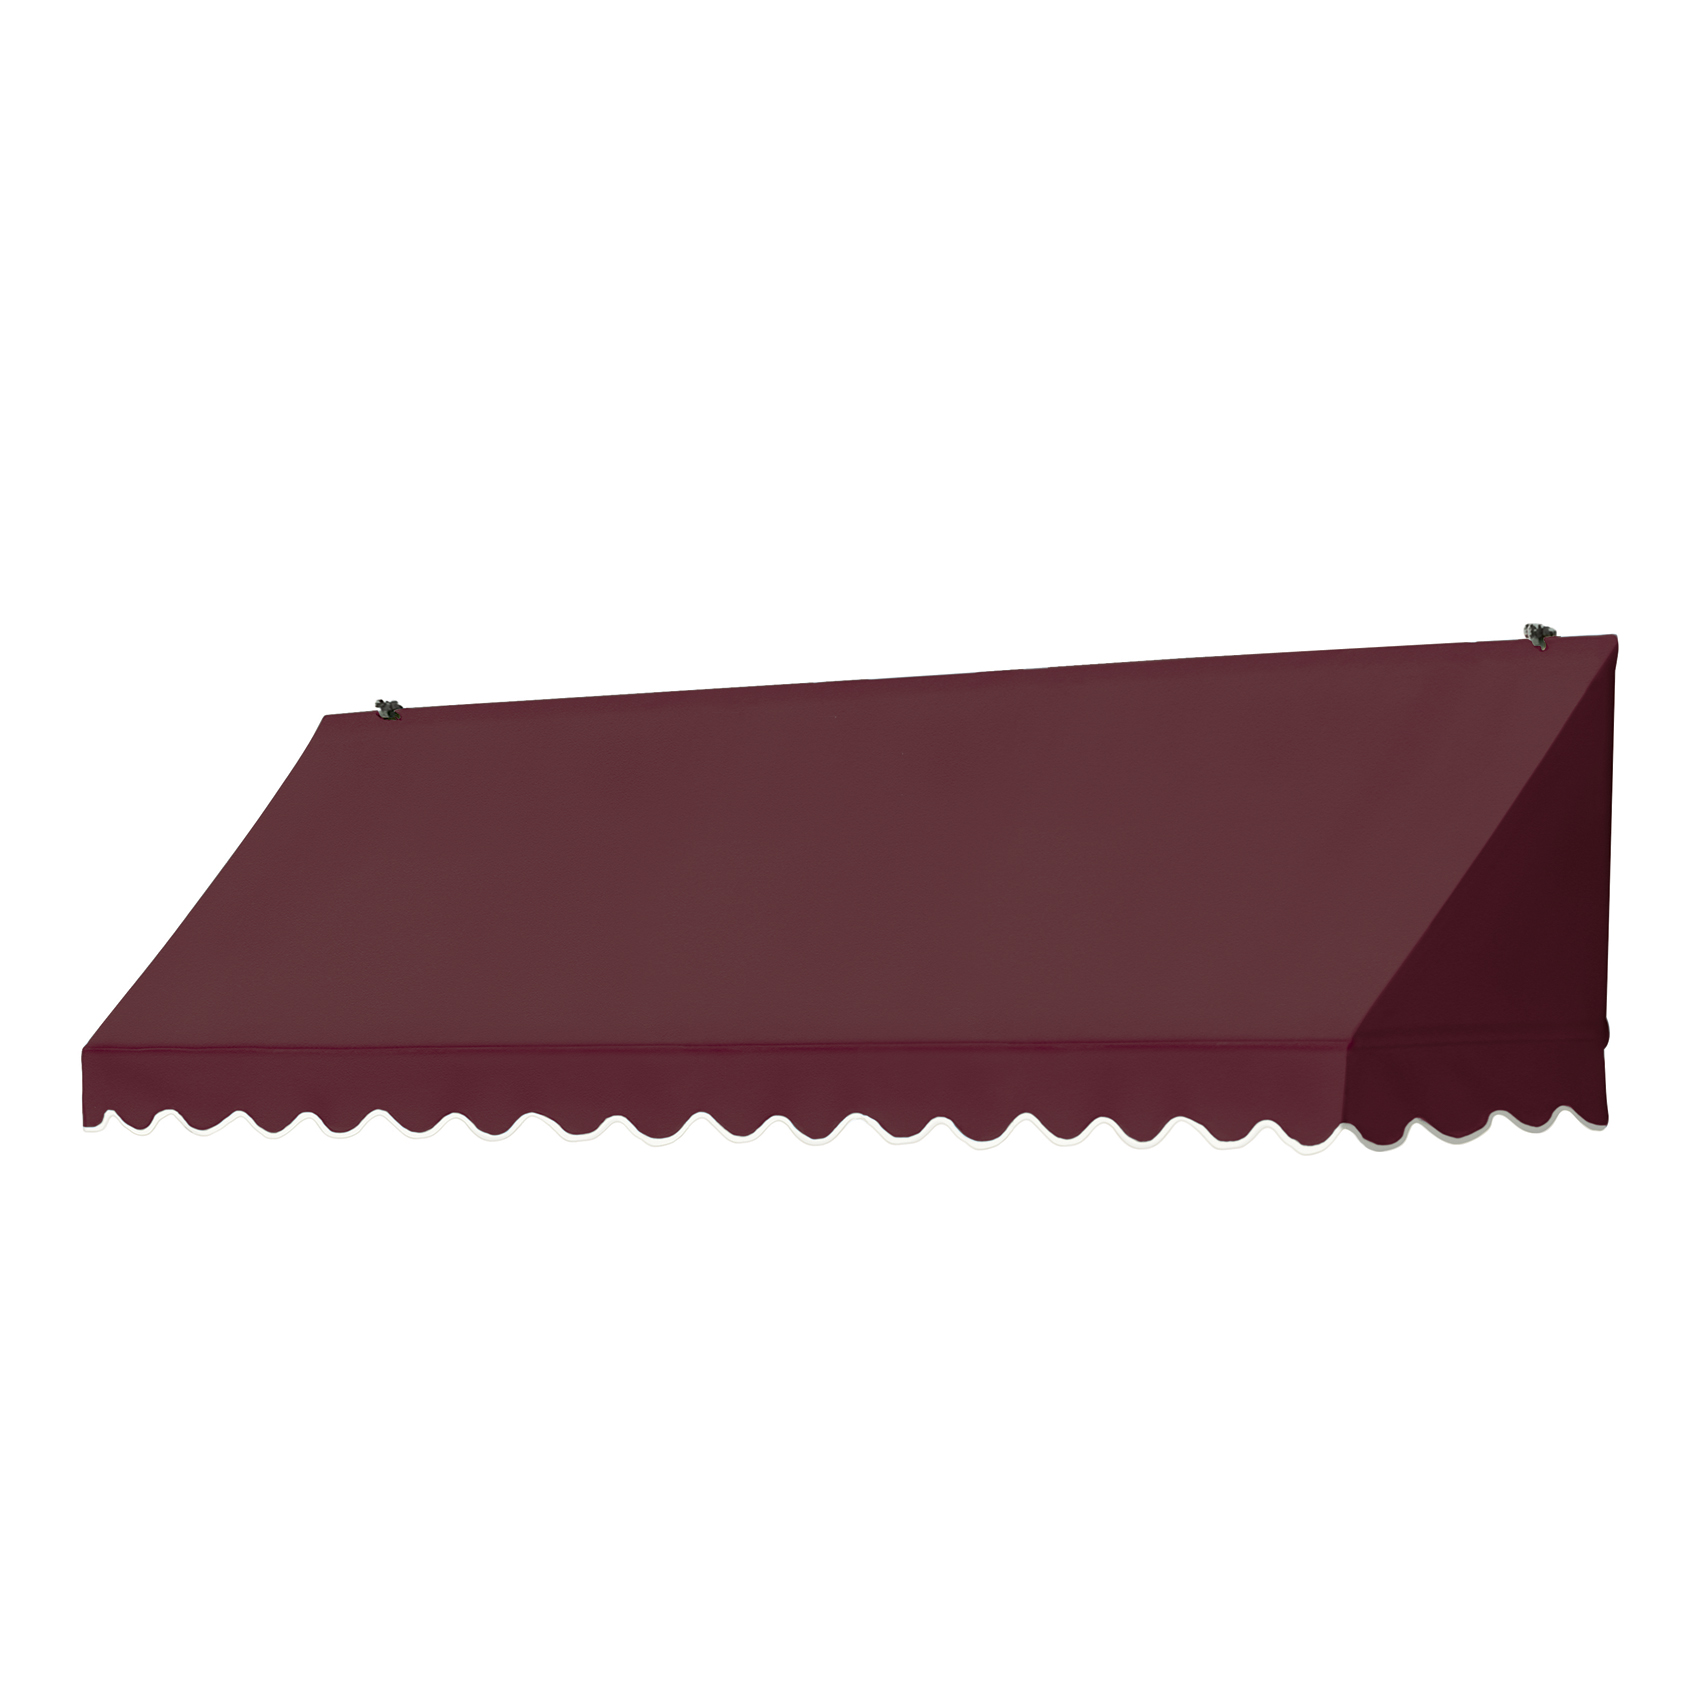 Awnings in a Box&reg; 8' Traditional Style Awning Replacement Cover in Assorted Colors